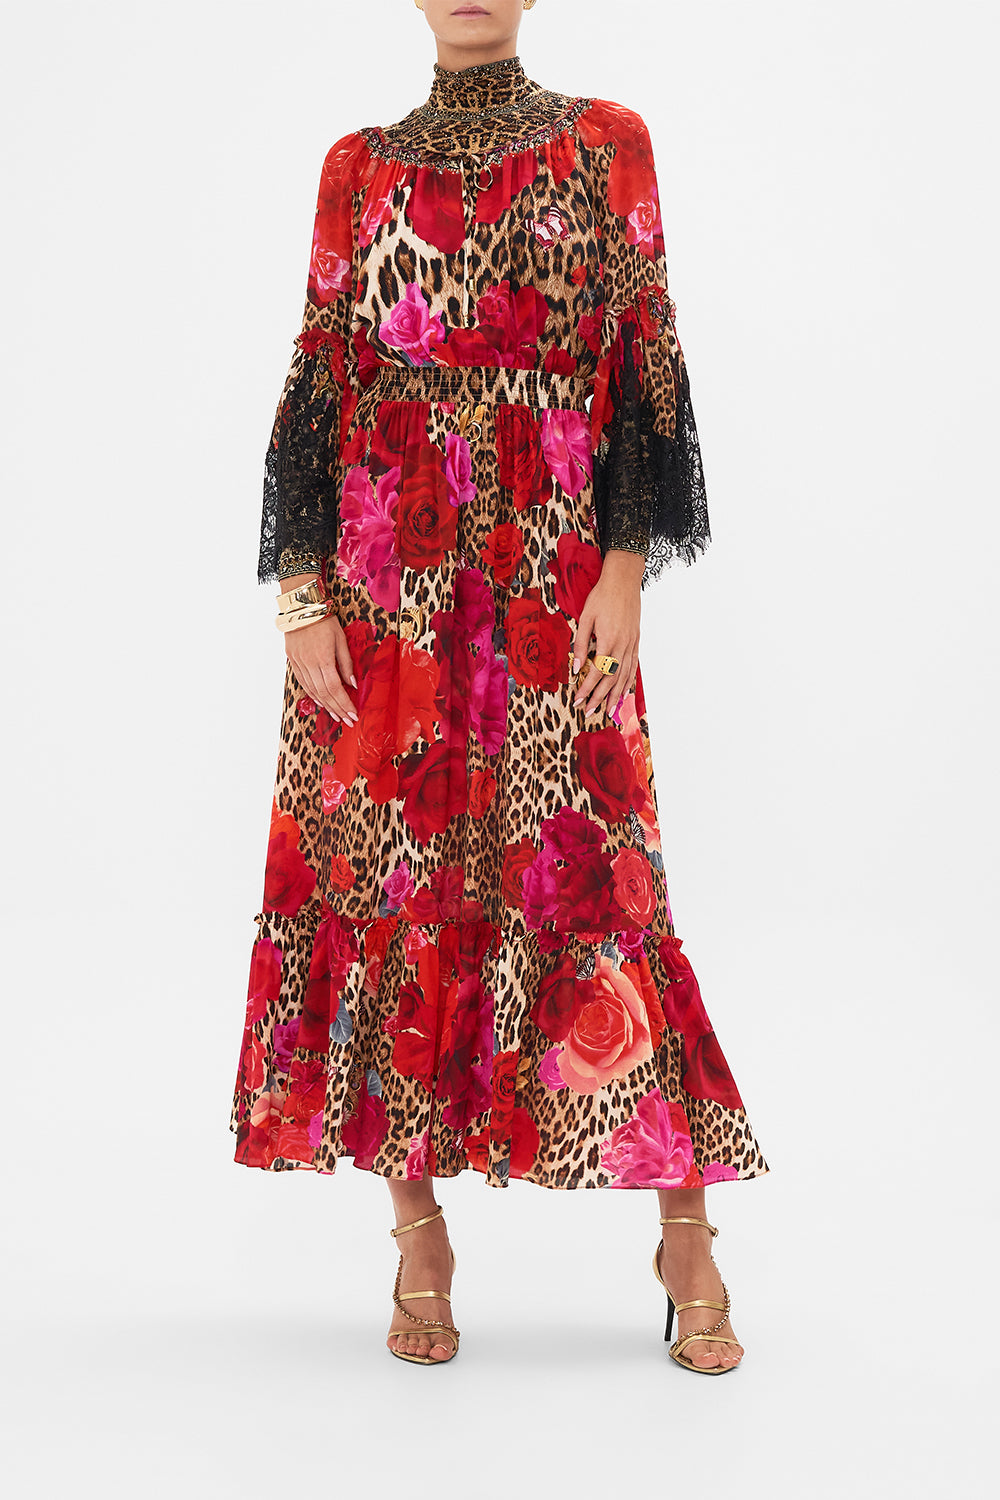 LONG DRESS WITH GATHERED BELL SLEEVE HEART LIKE A WILDFLOWER